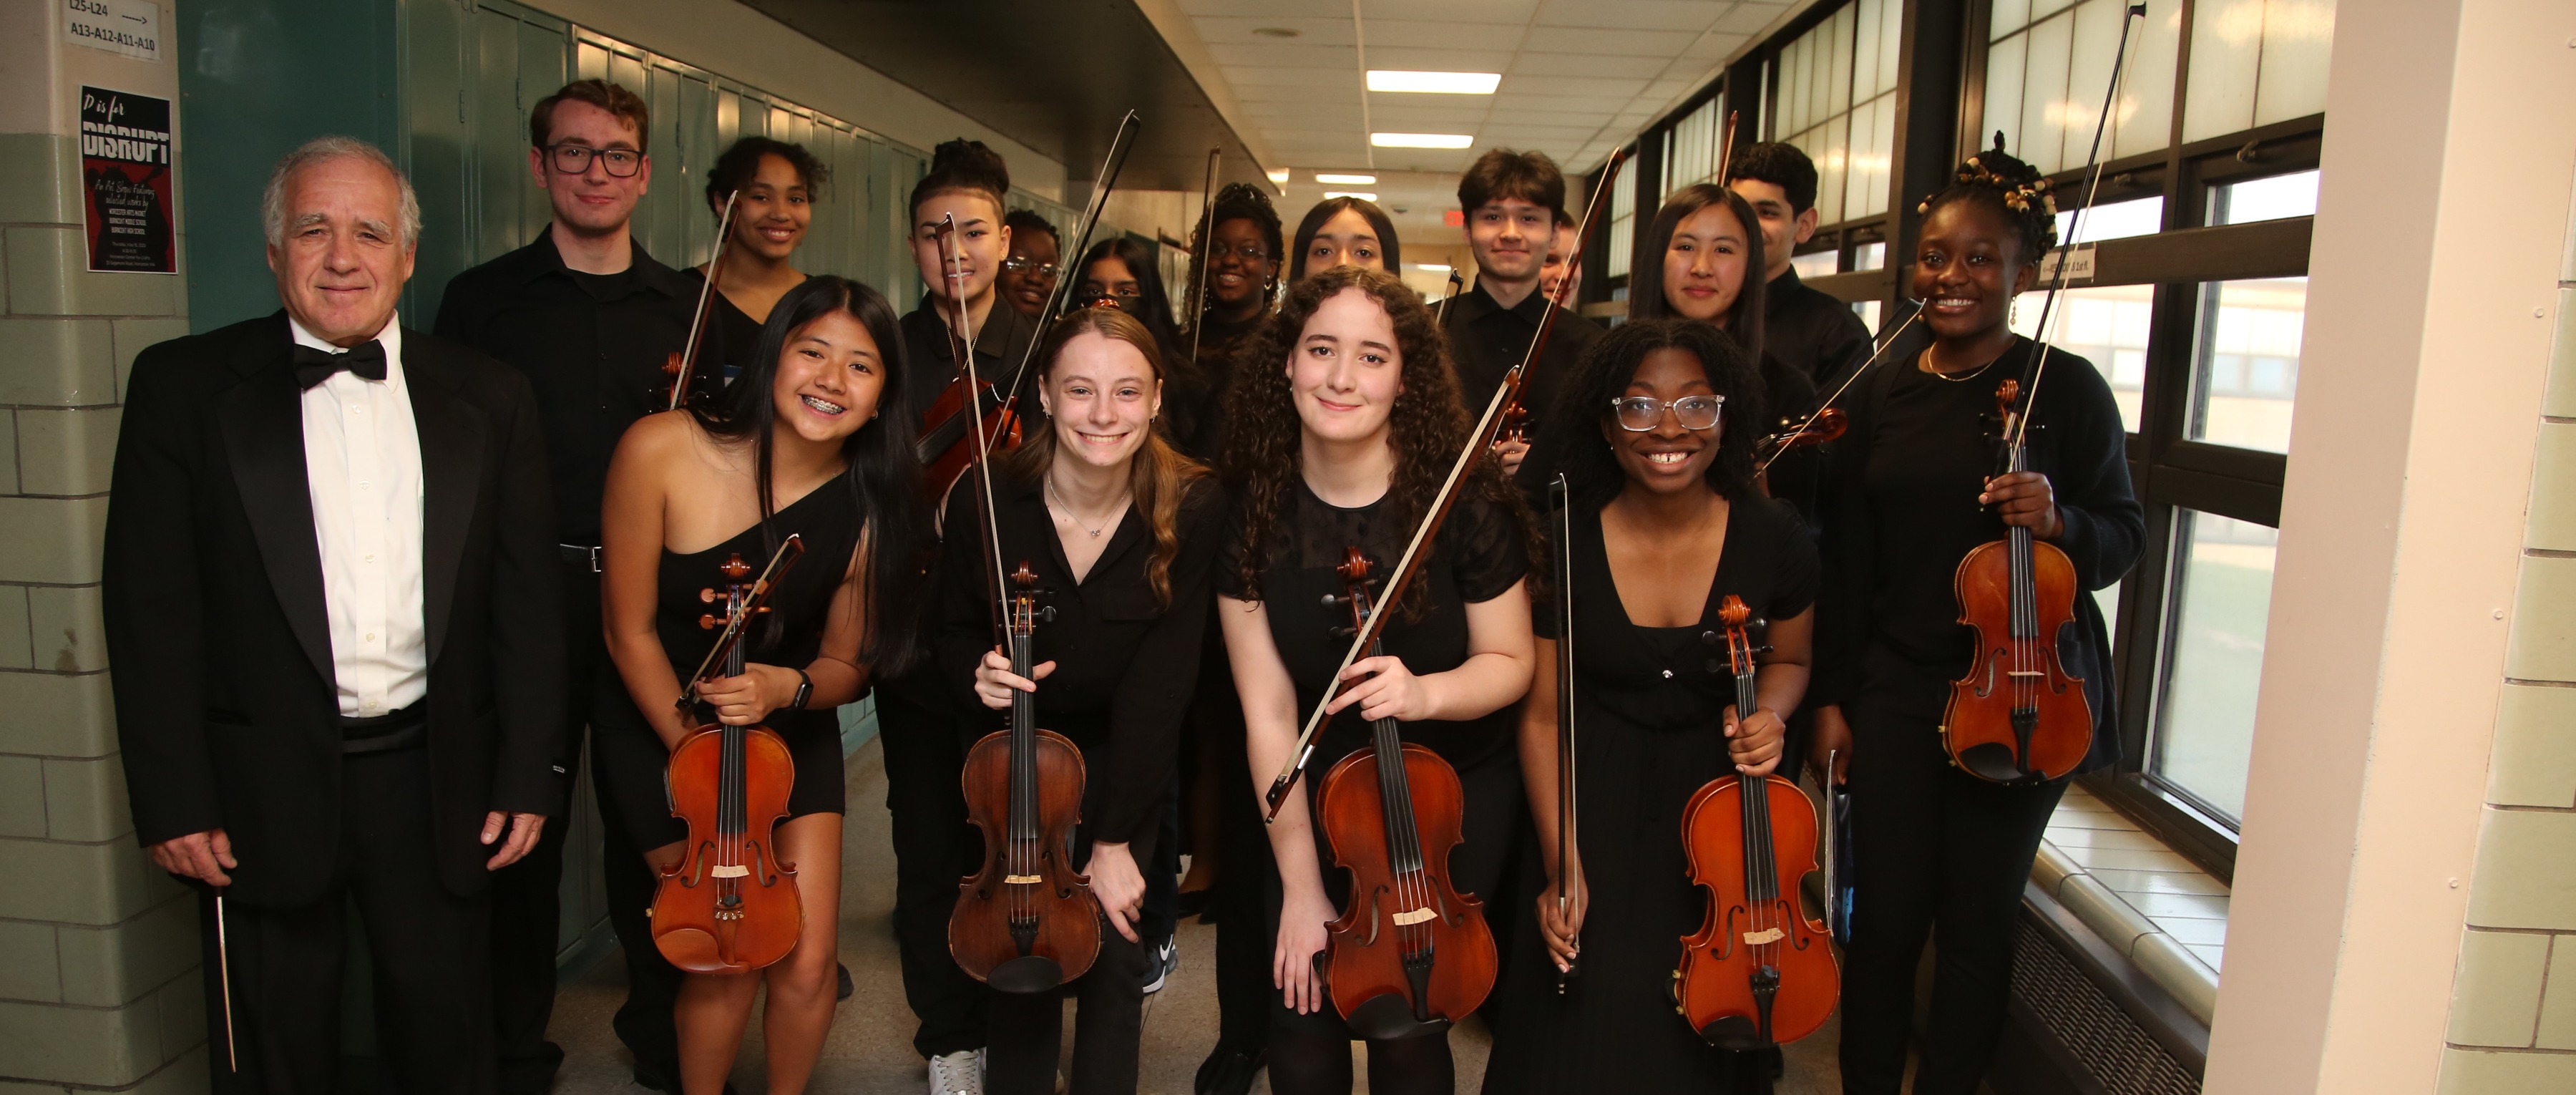 Orchestra students holding violins